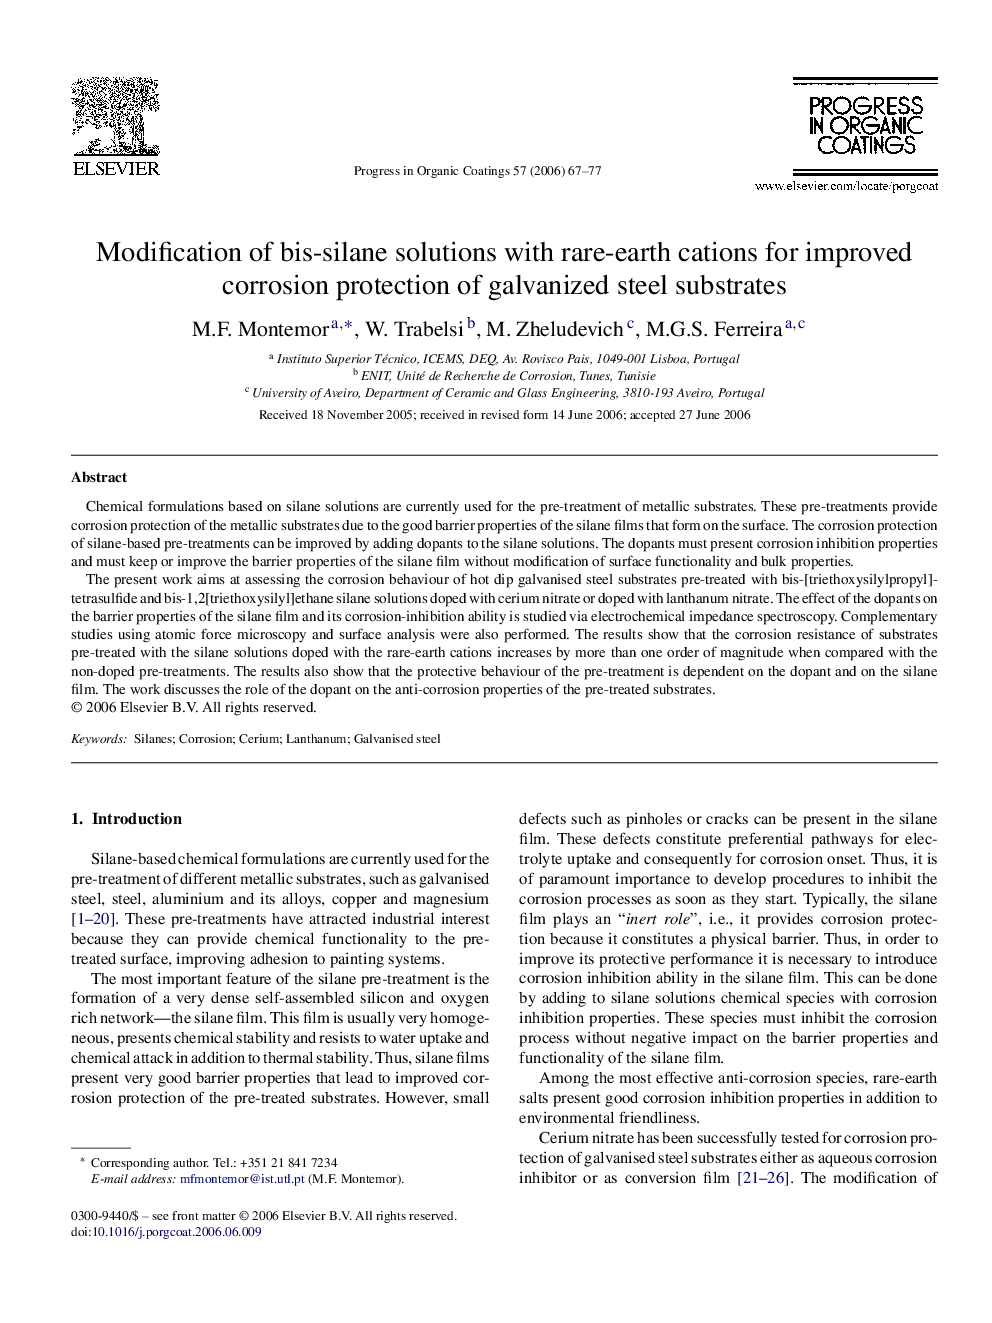 Modification of bis-silane solutions with rare-earth cations for improved corrosion protection of galvanized steel substrates